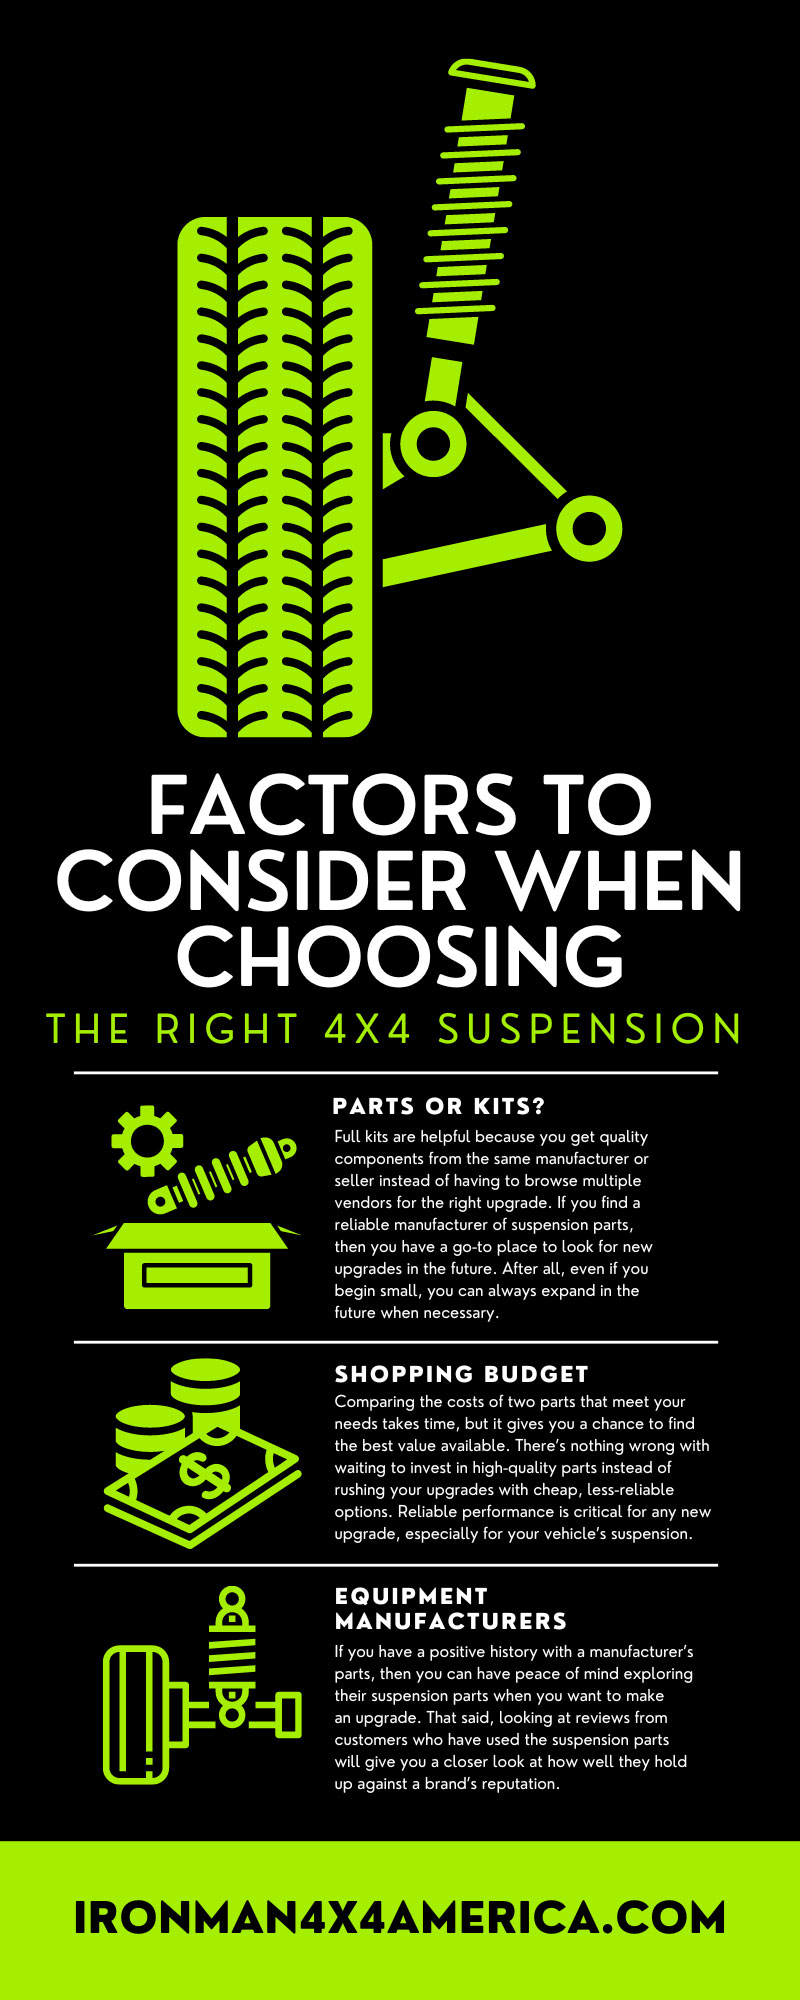 Factors To Consider When Choosing the Right 4x4 Suspension